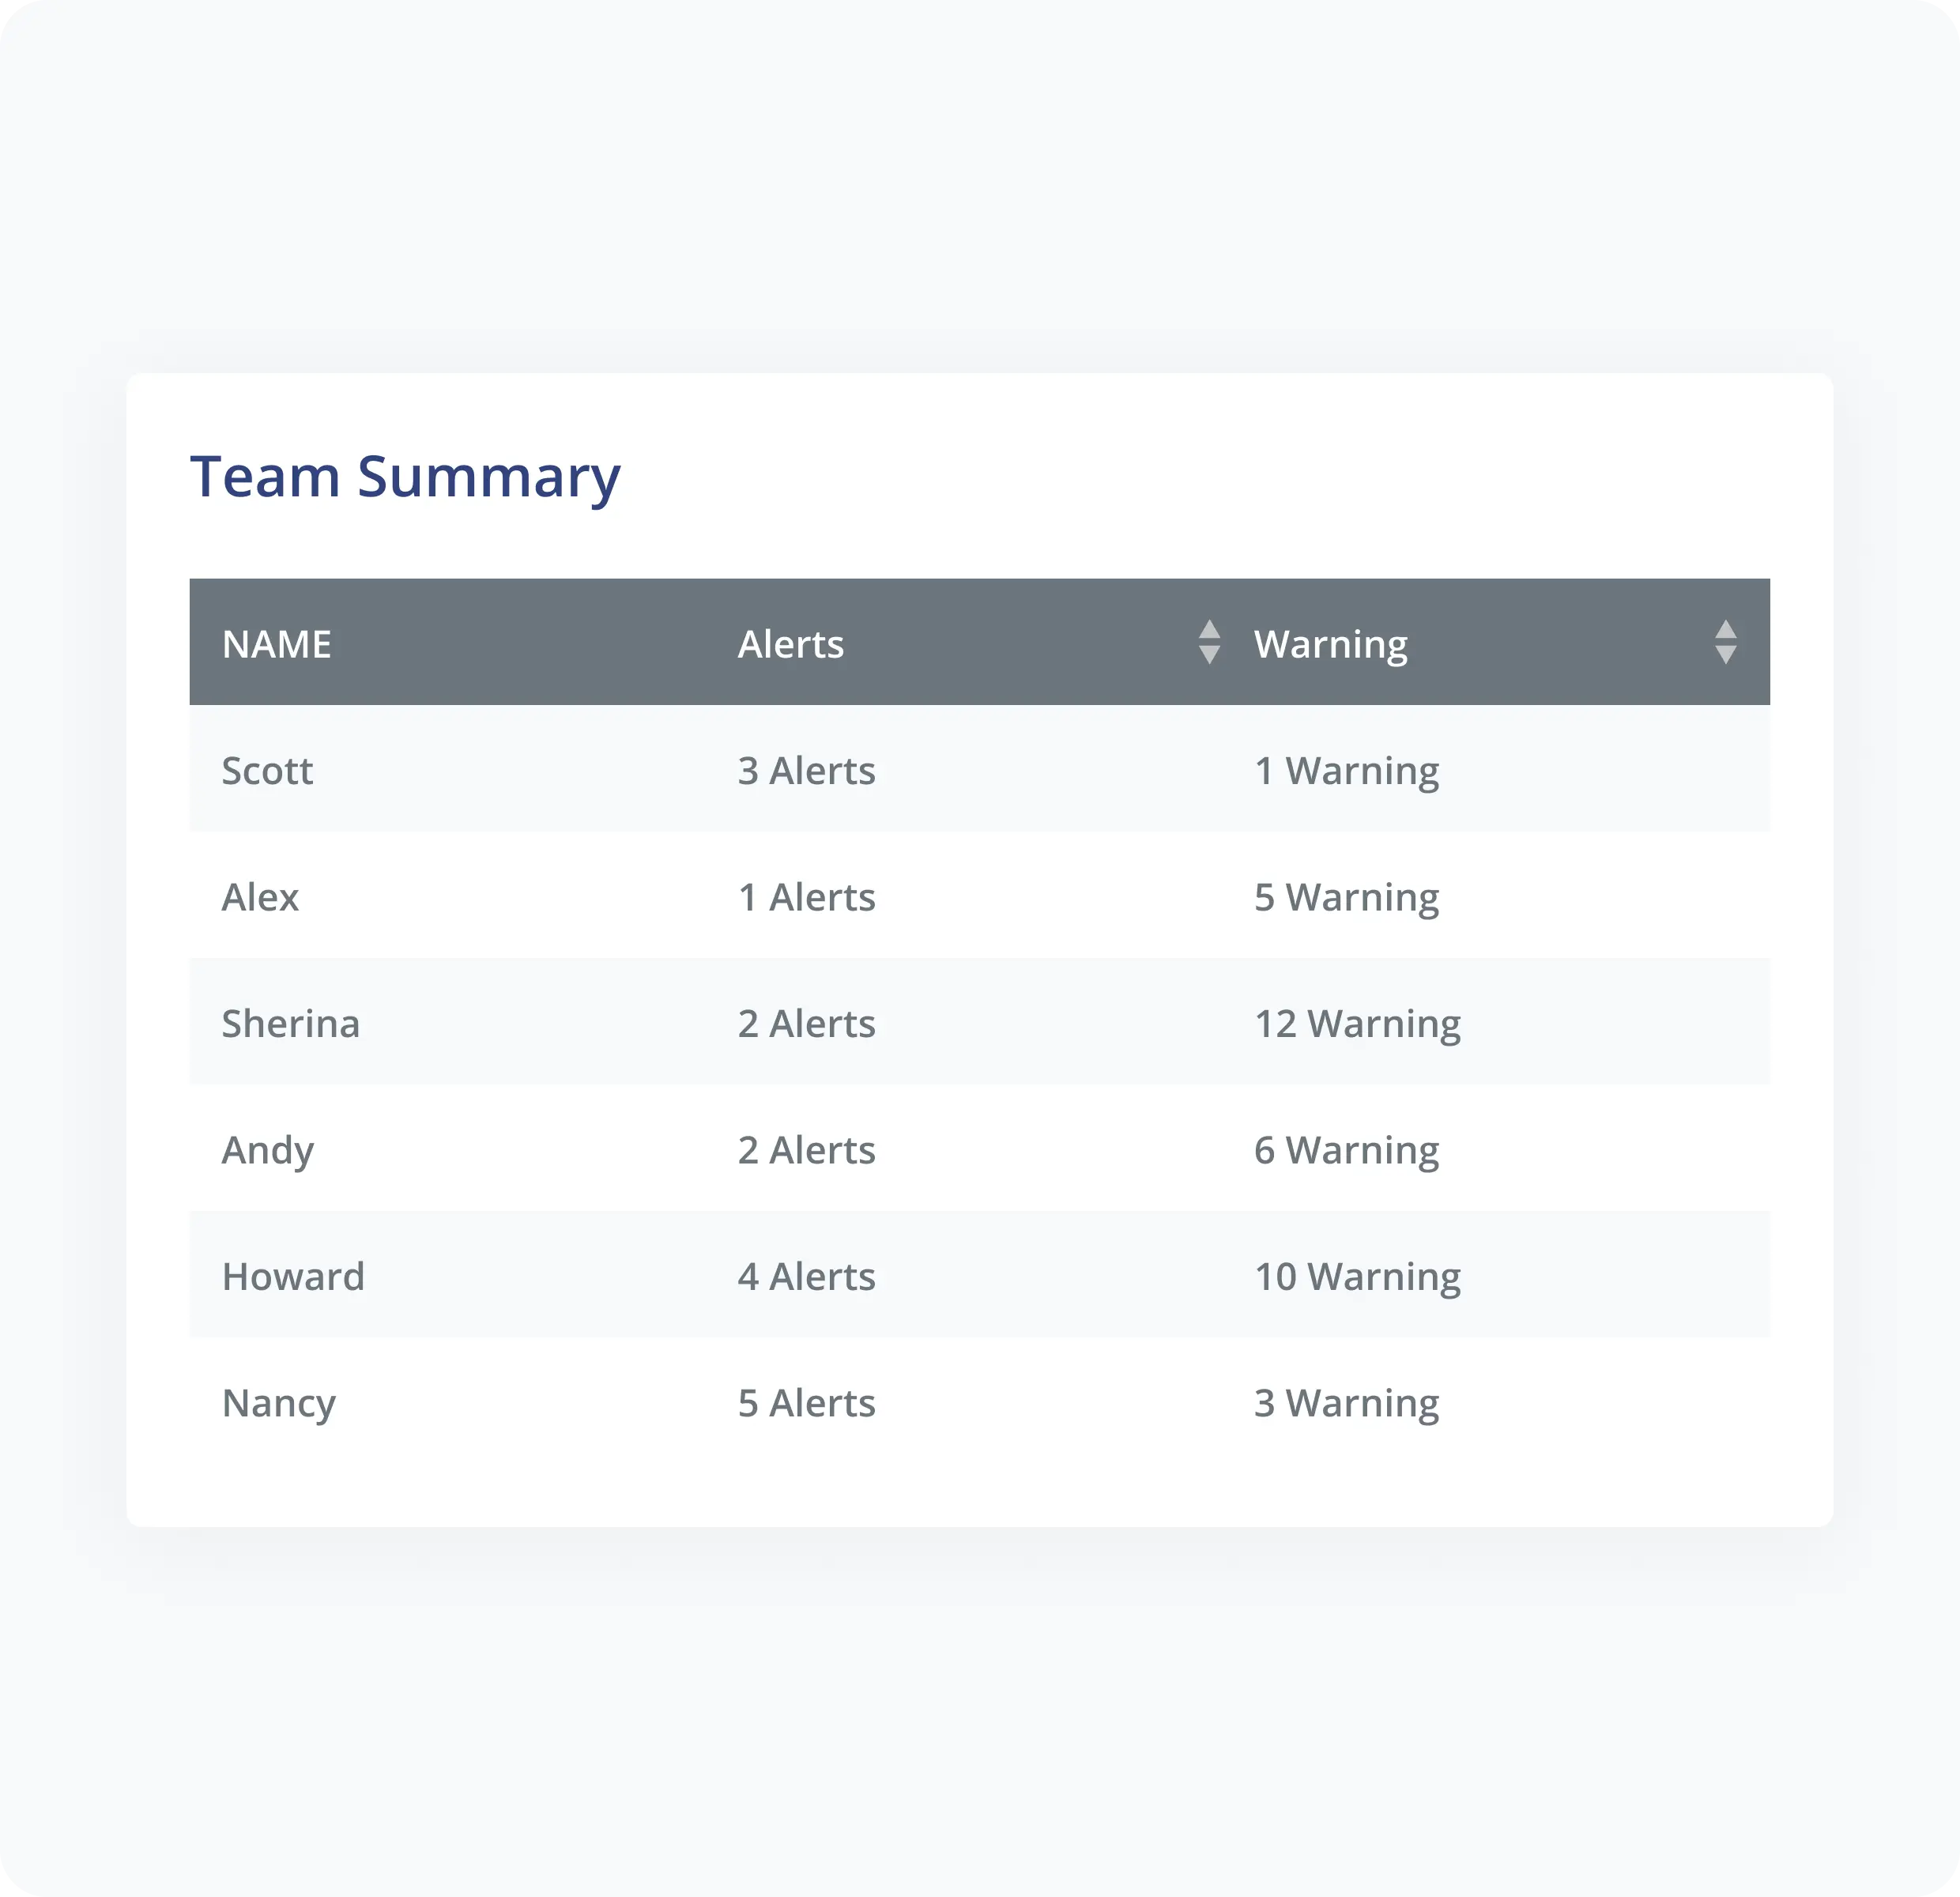 GoFreight’s Team Summary application, showing several team names and their associated alerts and warnings in one place.